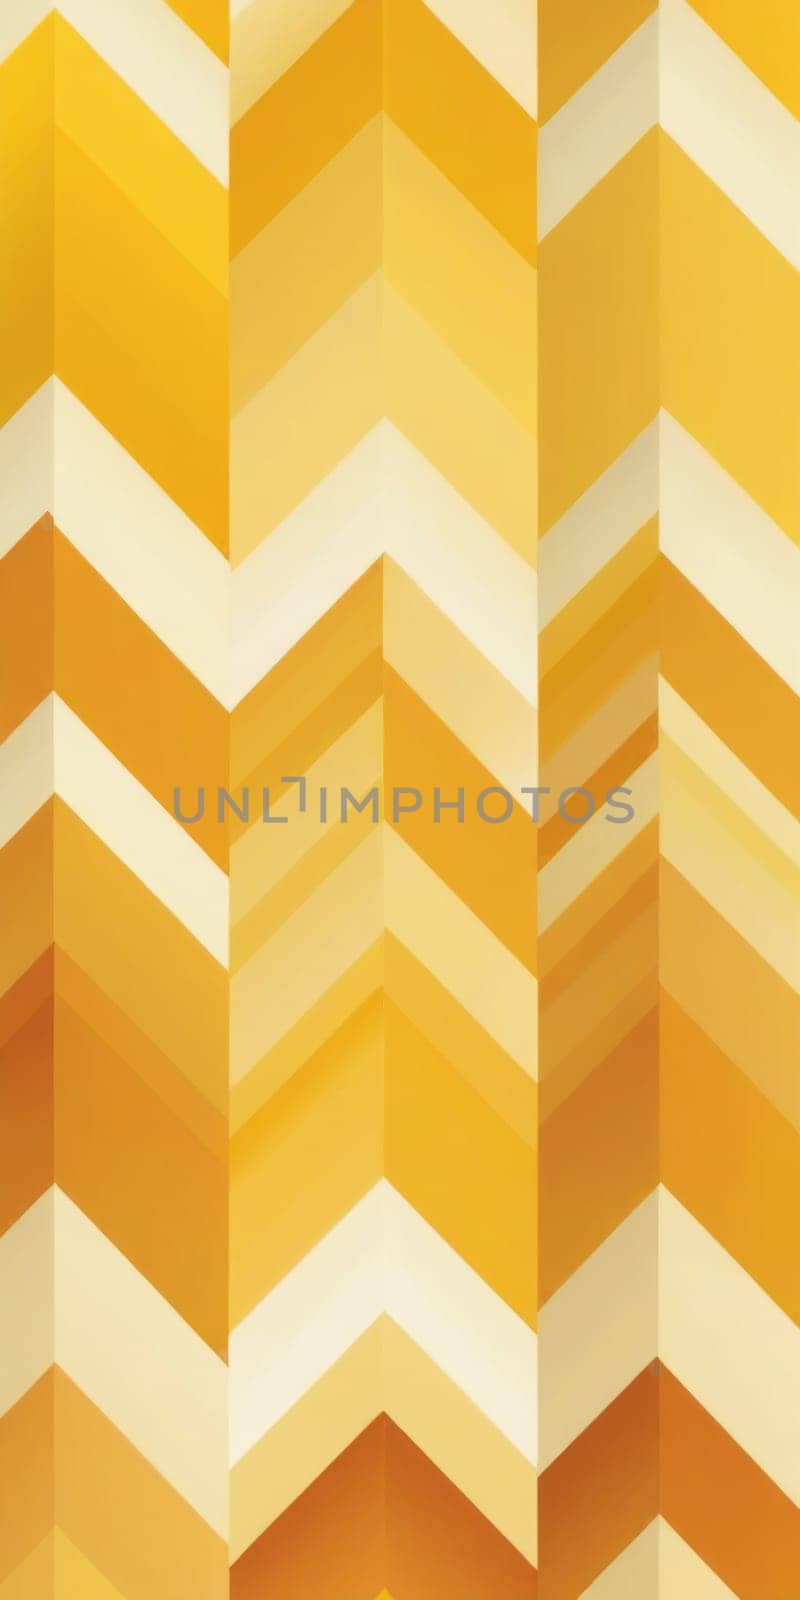 Chevron Shapes in Yellow Ivory by nkotlyar